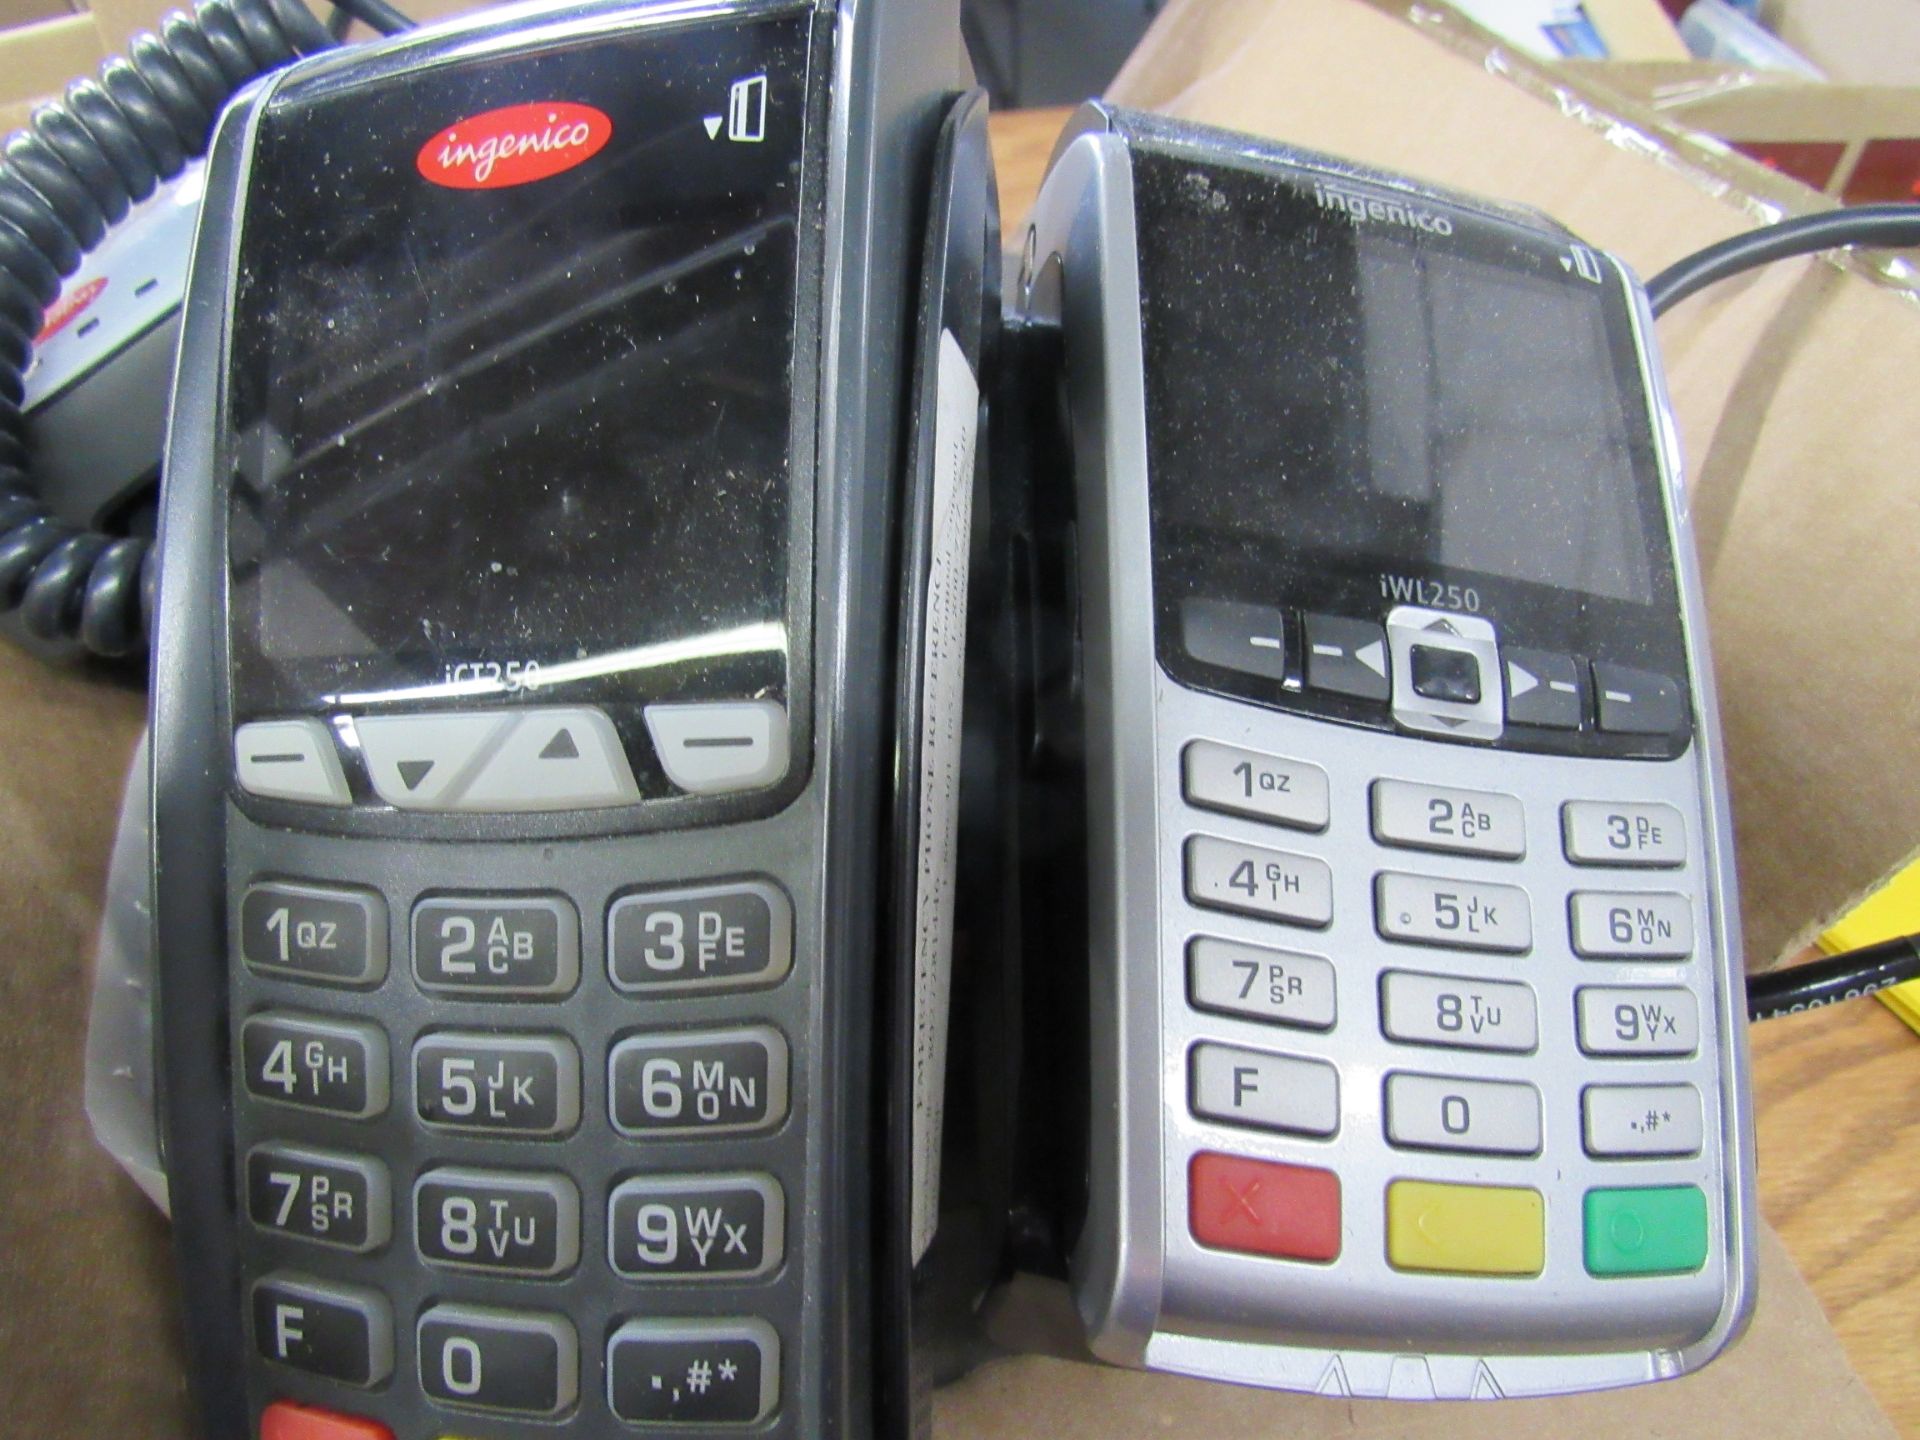 Grp of Credit card systems and tape: VeriFone and Ignecio - Image 6 of 8